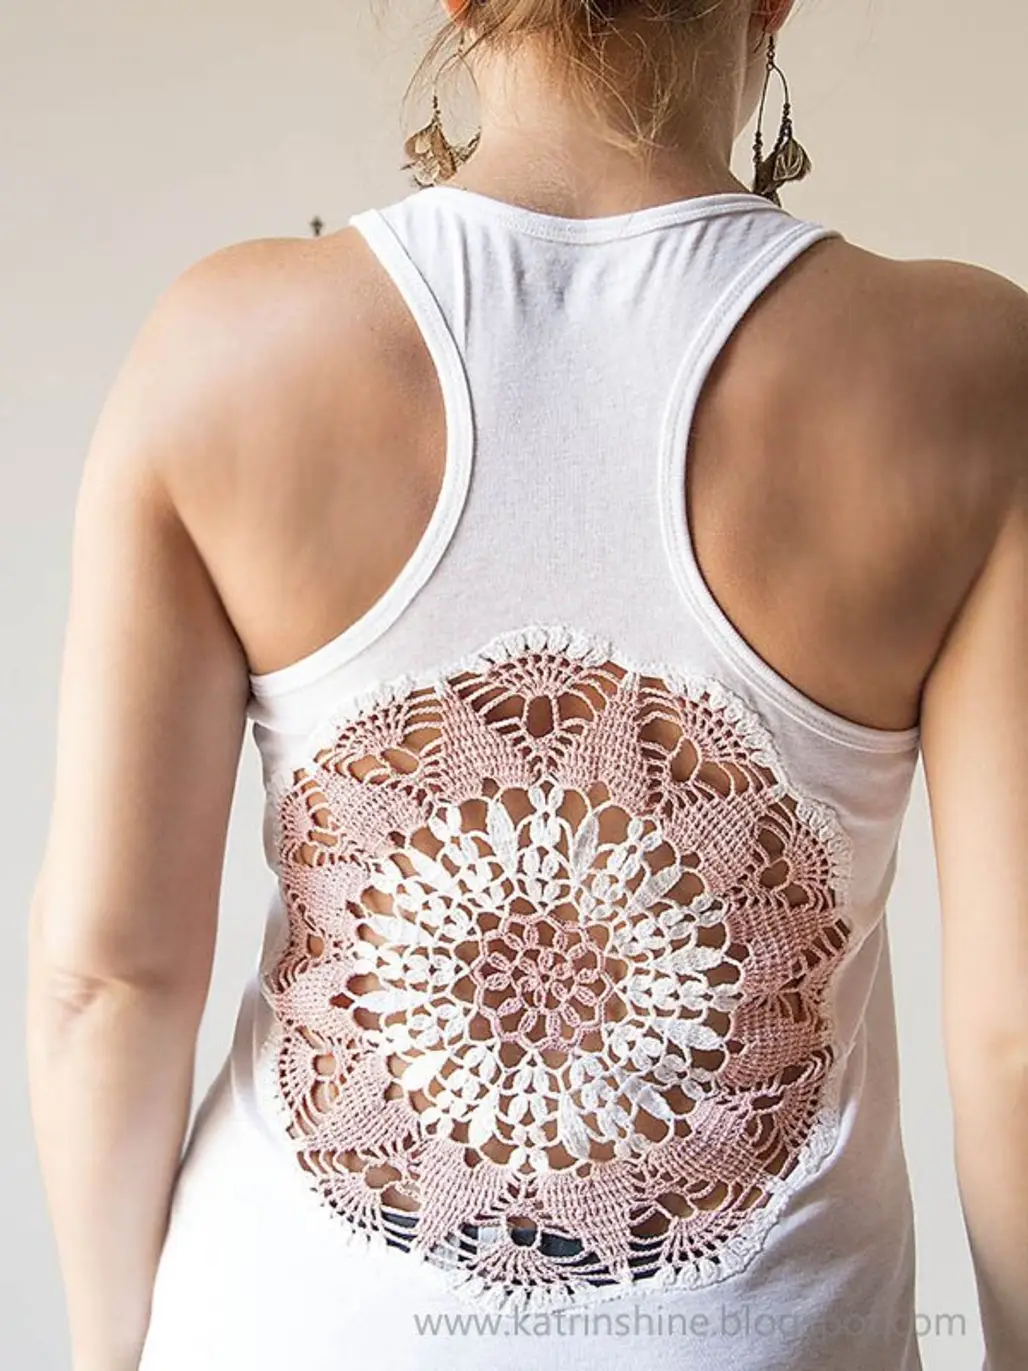 Give a Tank Top a Doily Makeover